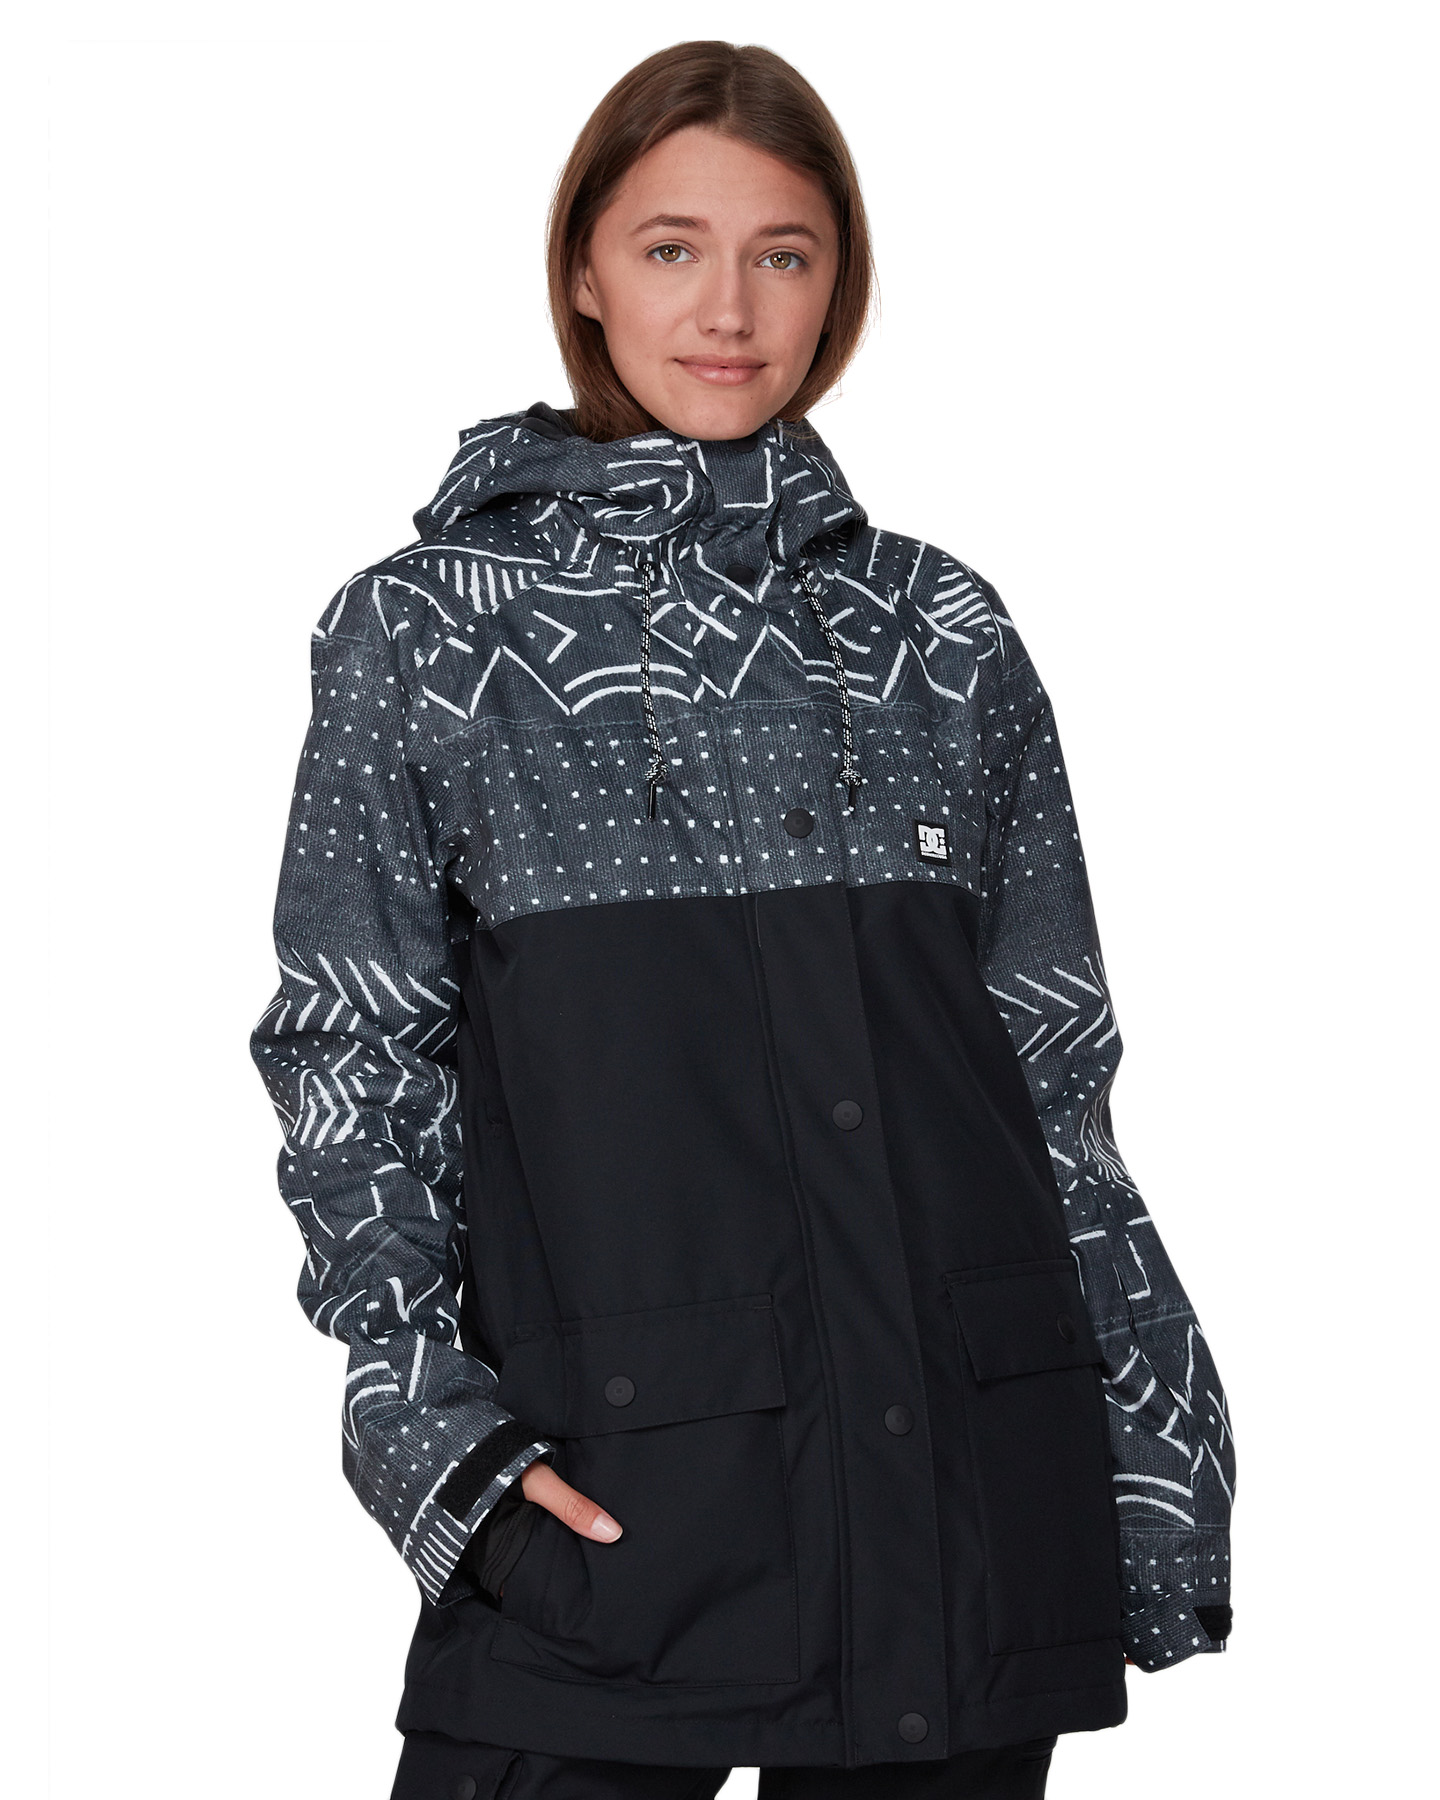 Dc Shoes Womens Cruiser Snow Jacket 